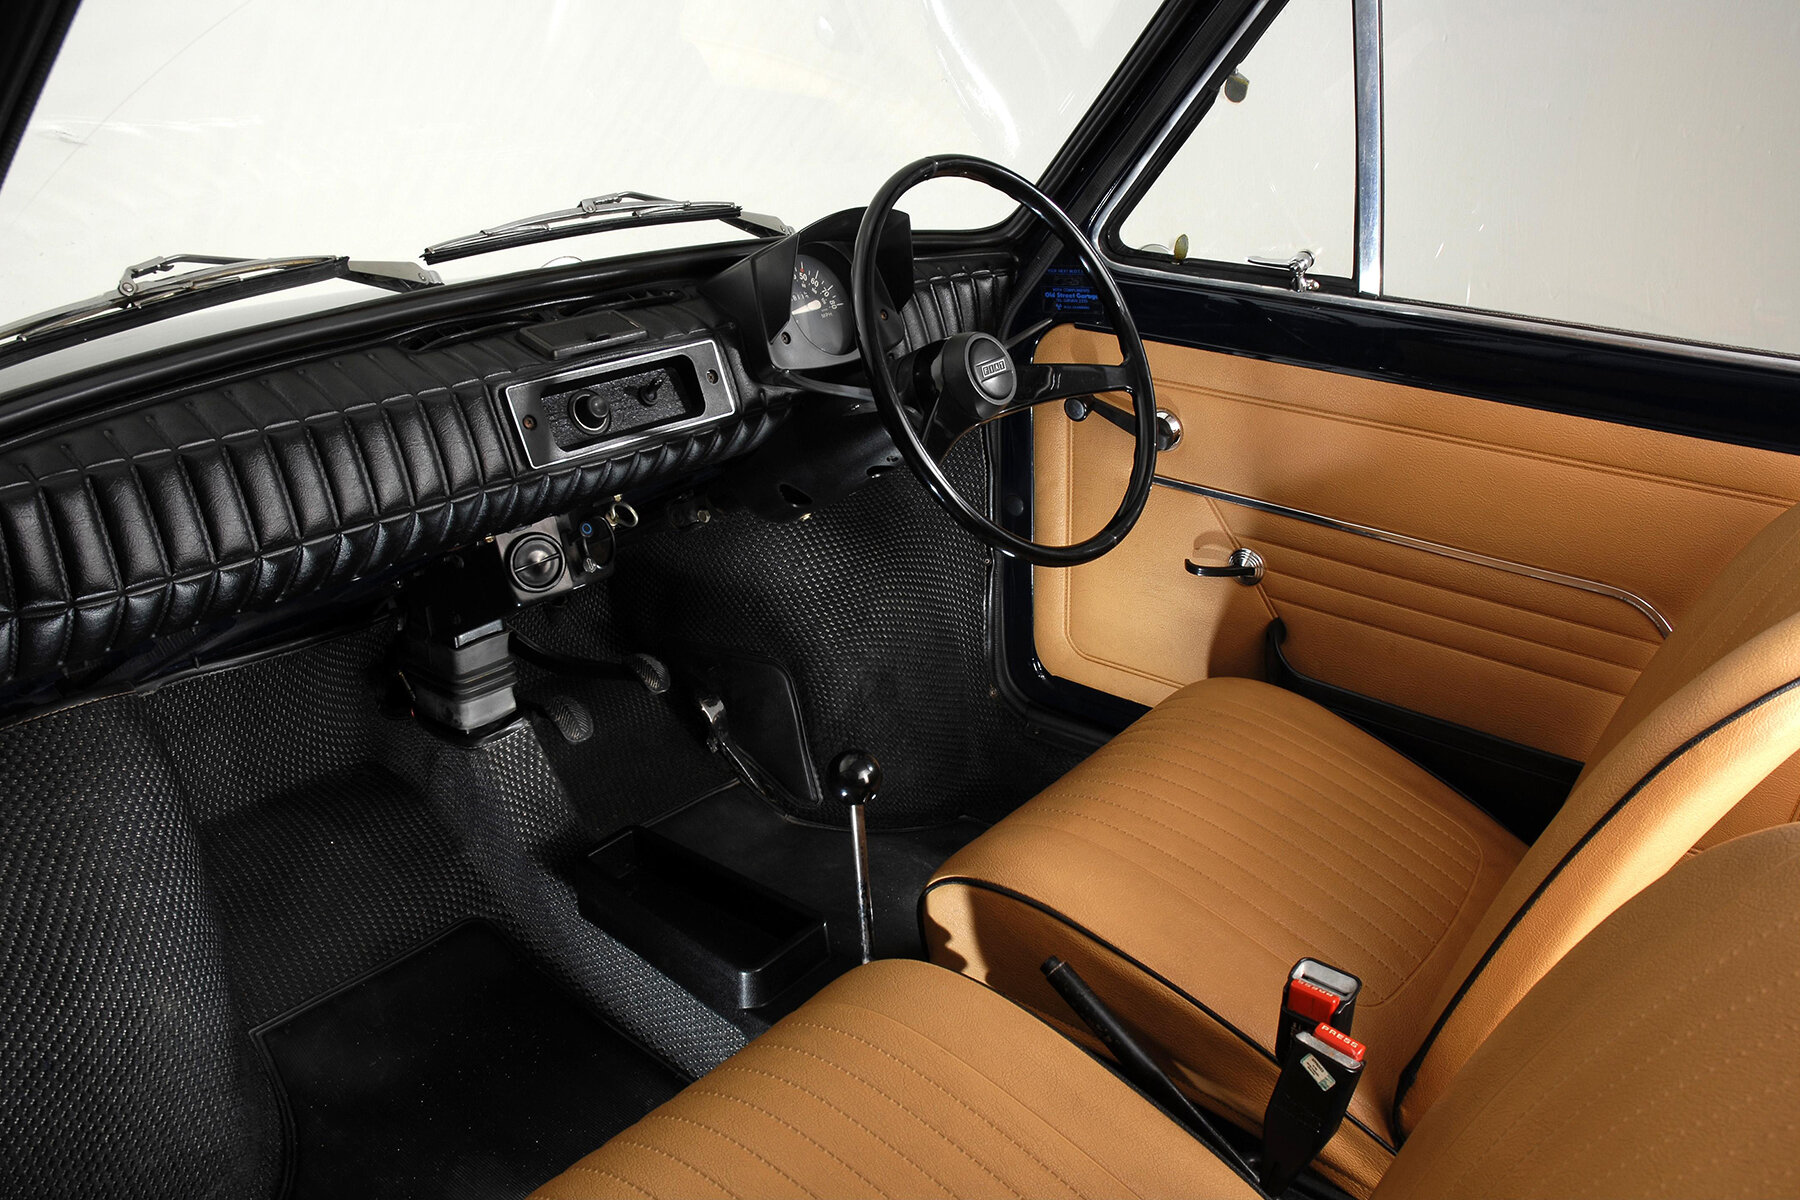 An early-1970s supermini interior, except in miniature.